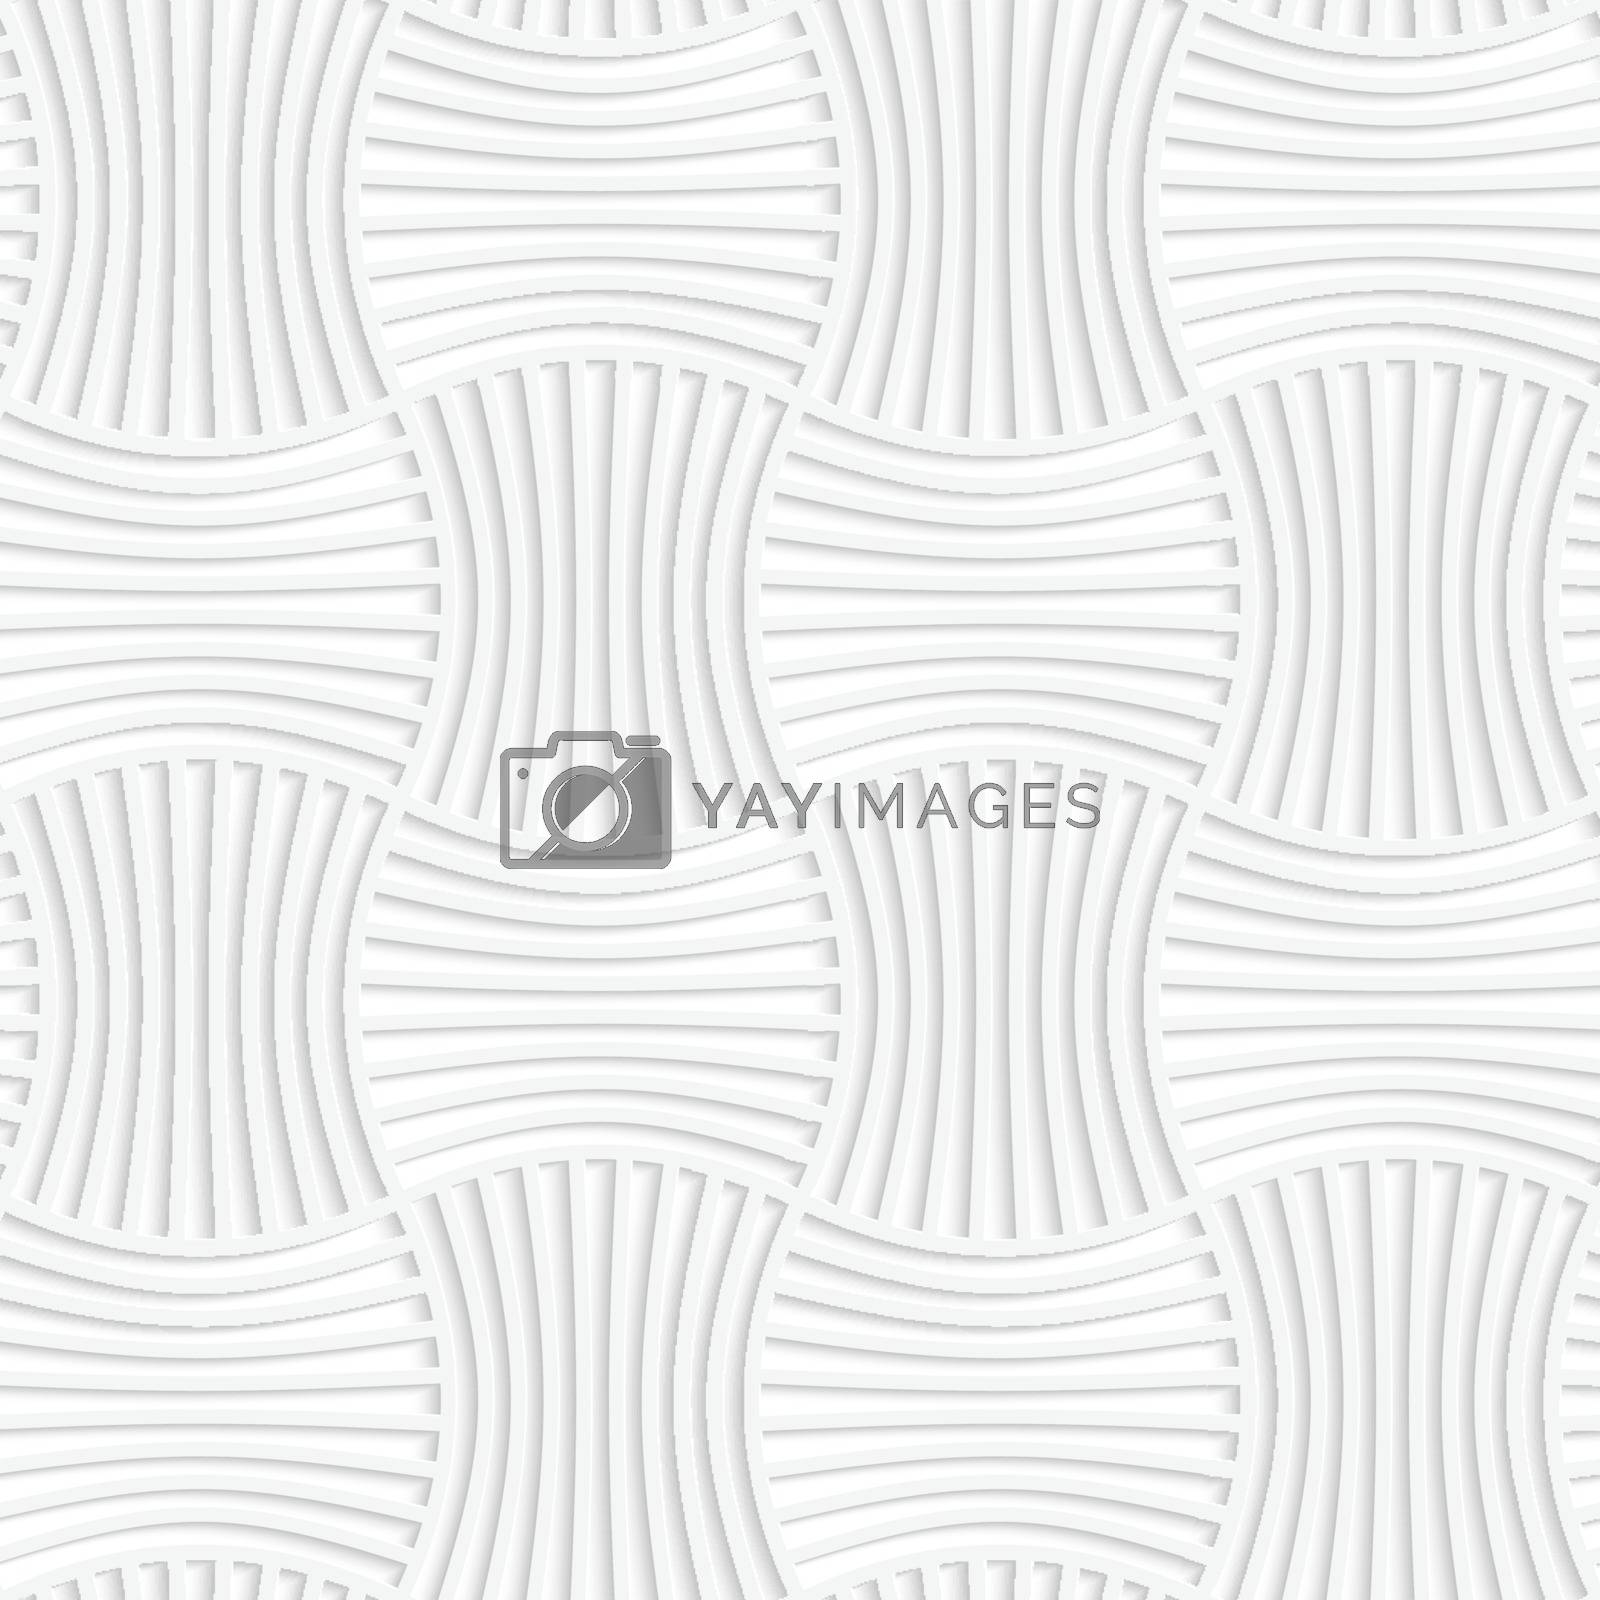 Royalty free image of White paper 3D five striped wavy pin will rectangles by Zebra-Finch